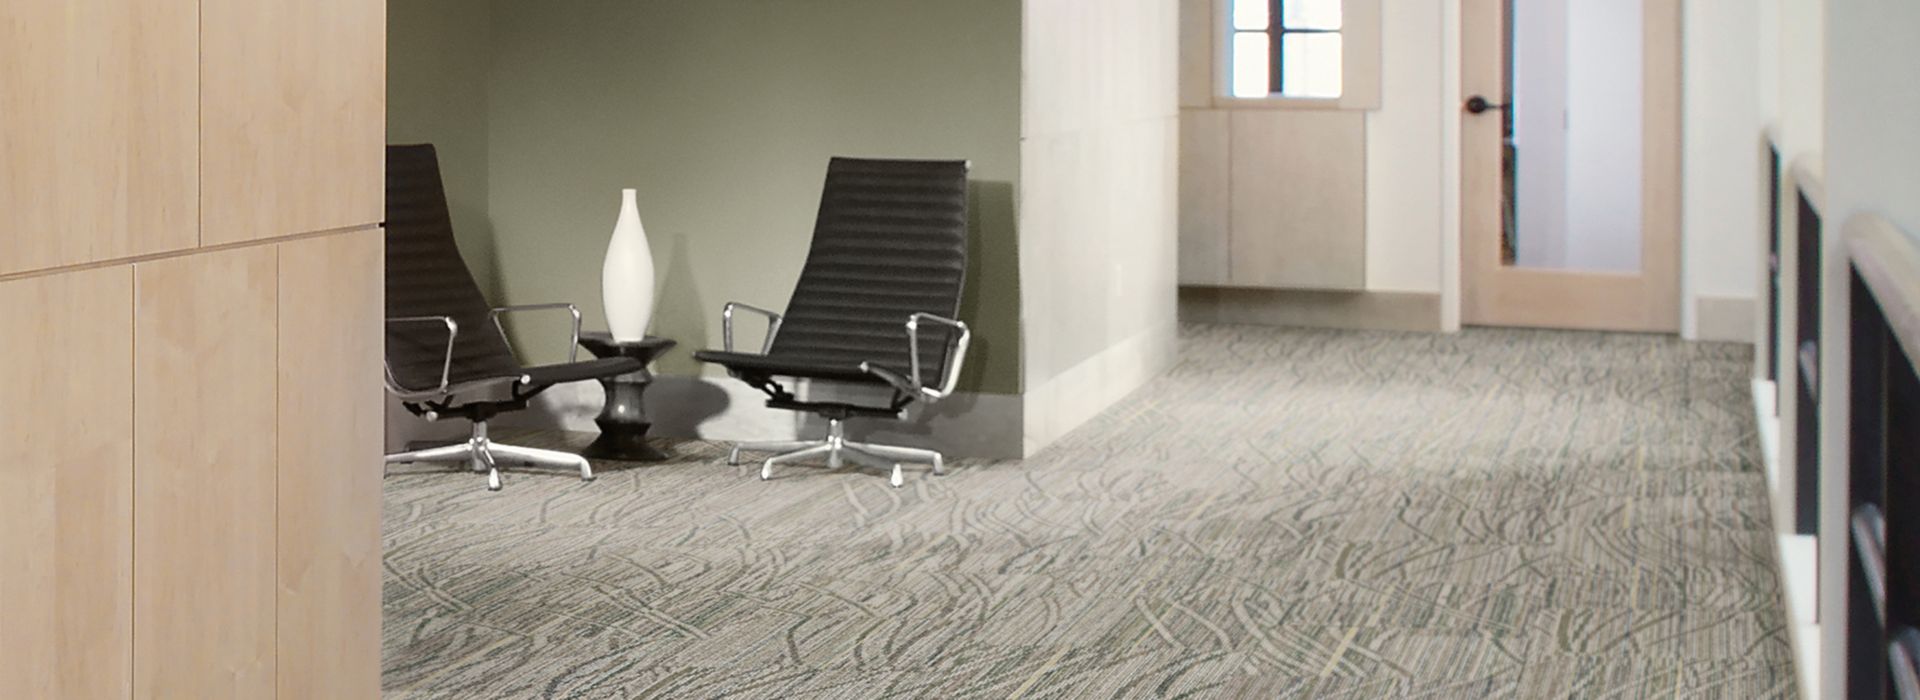 Interface Prairie Grass Loop carpet tile in corridor with seating area on side numéro d’image 1